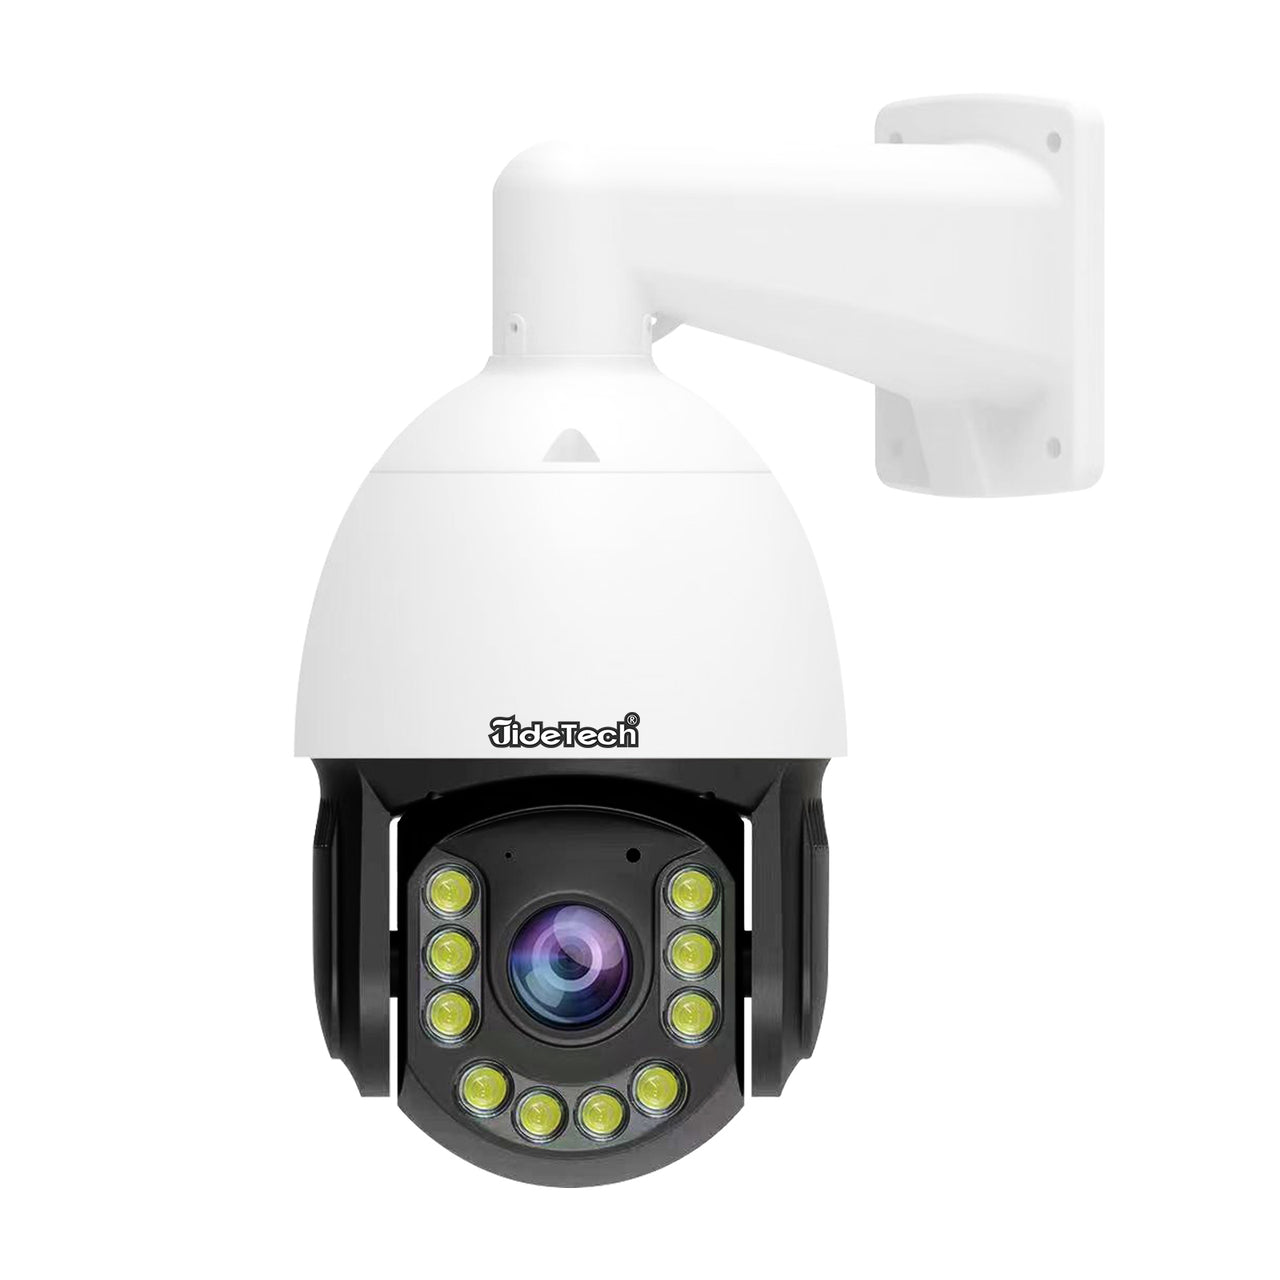 JideTech 8MP 36X PTZ Camera with Absolute Positioning(P22-36X-8MP30)